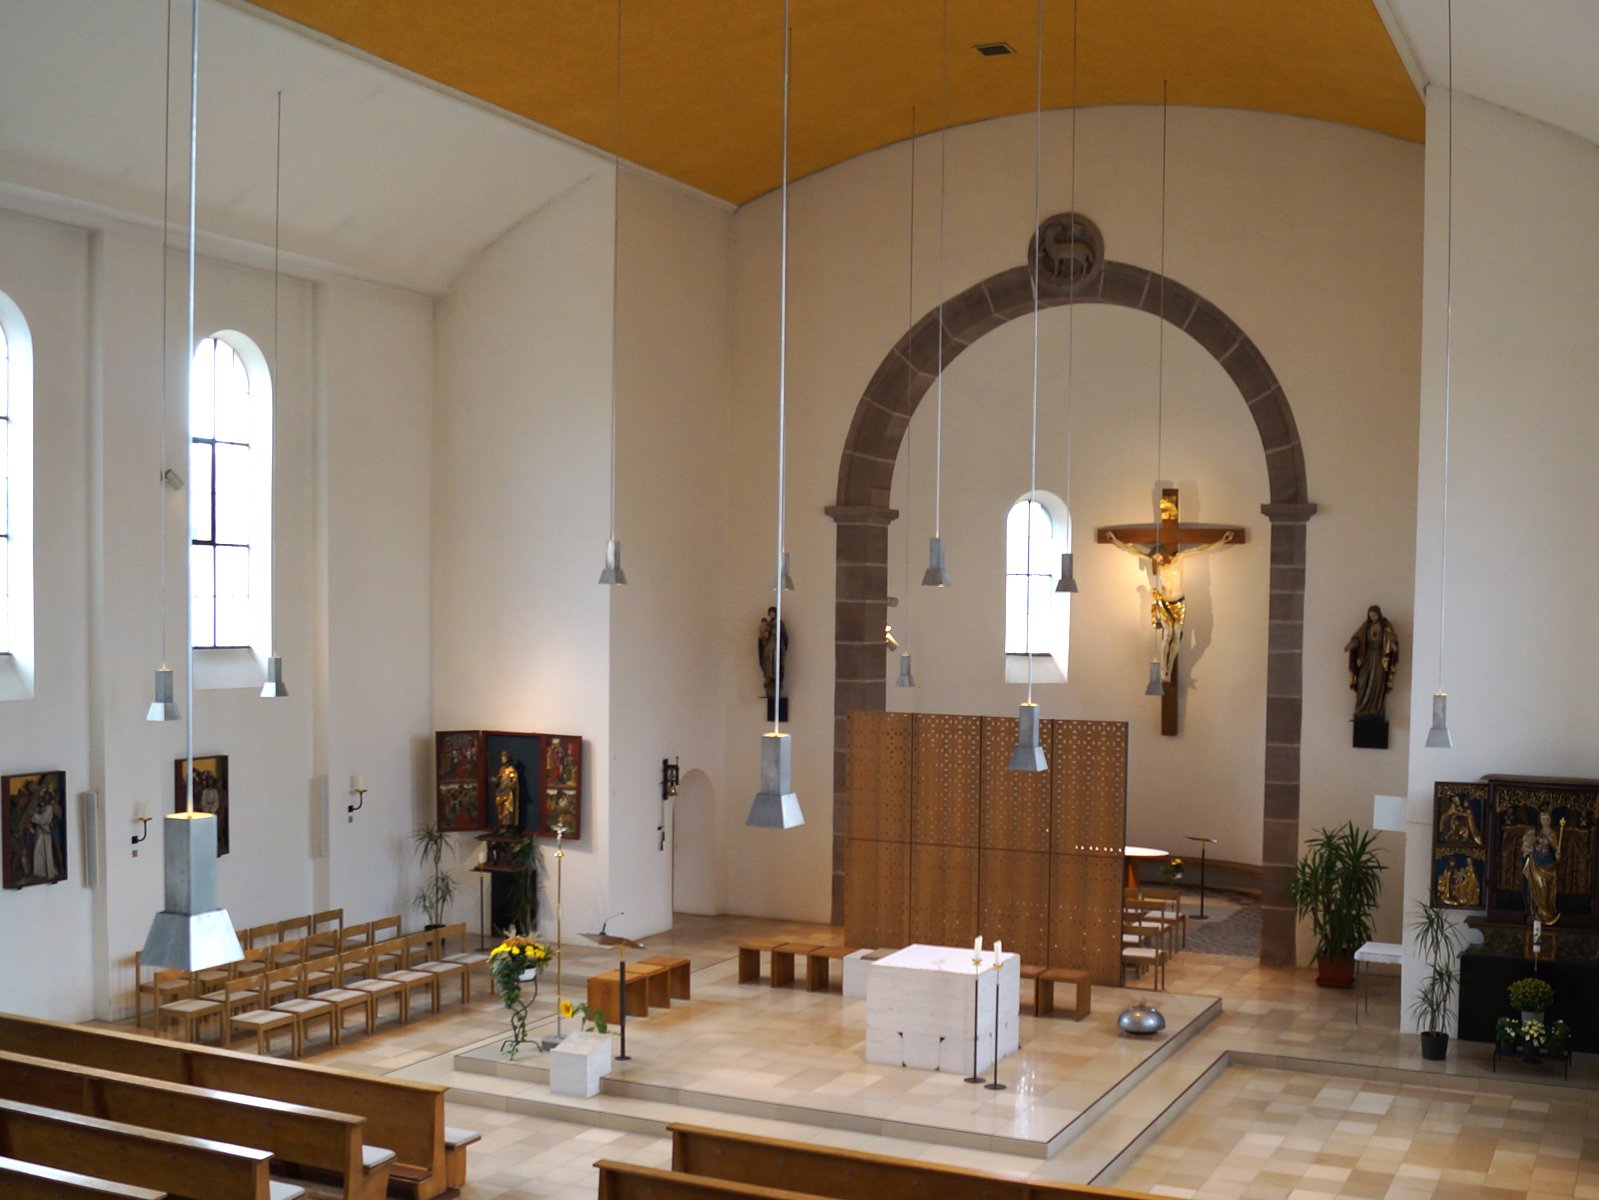 Interior shot looking towards the altar in the Catholic Church